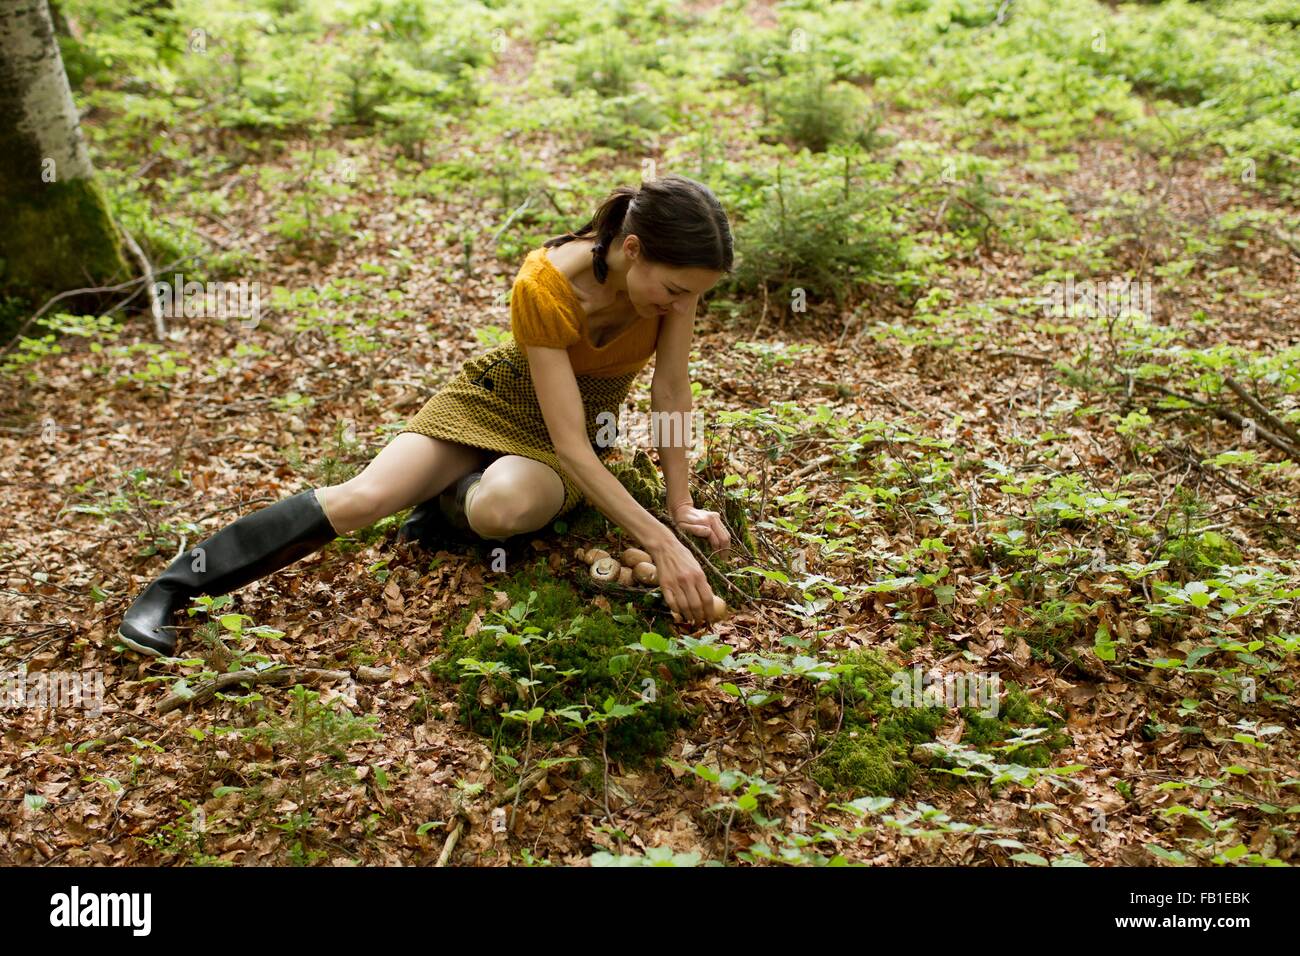 High angle view of mature woman wearing knee length boots sitting on autumn leaves foraging for mushrooms Stock Photo